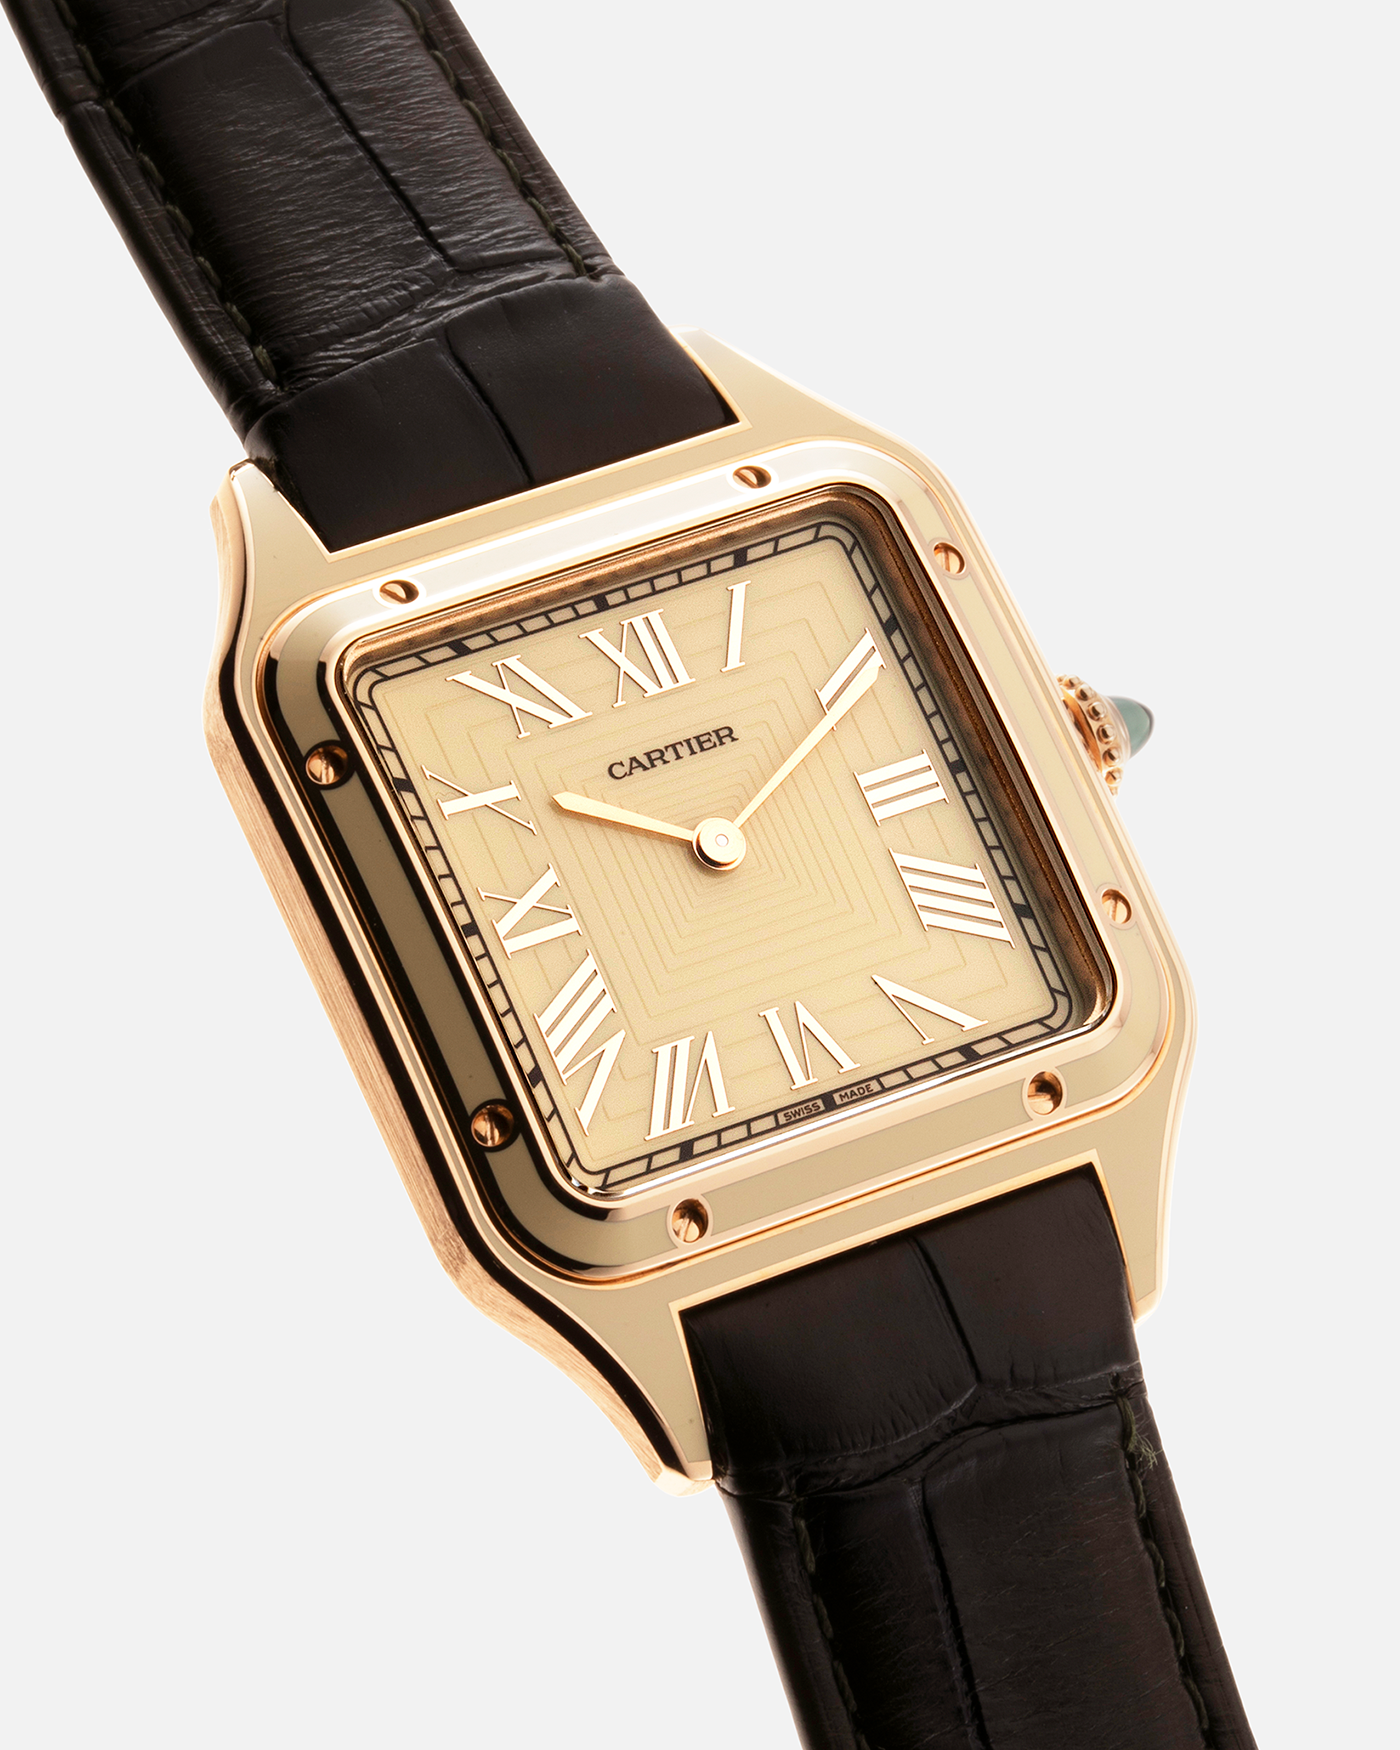 Brand: Cartier Year: 2023 Model: Santos-Dumont Large Material: 18-carat Rose Gold, Beige Lacquer Movement: Cartier Cal. 430 MC, Manual-Winding Case Diameter: 43.5mm x 31.4mm Bracelet / Strap: Cartier Black Alligator Leather Strap with Signed 18-carat Rose Gold Tang Buckle